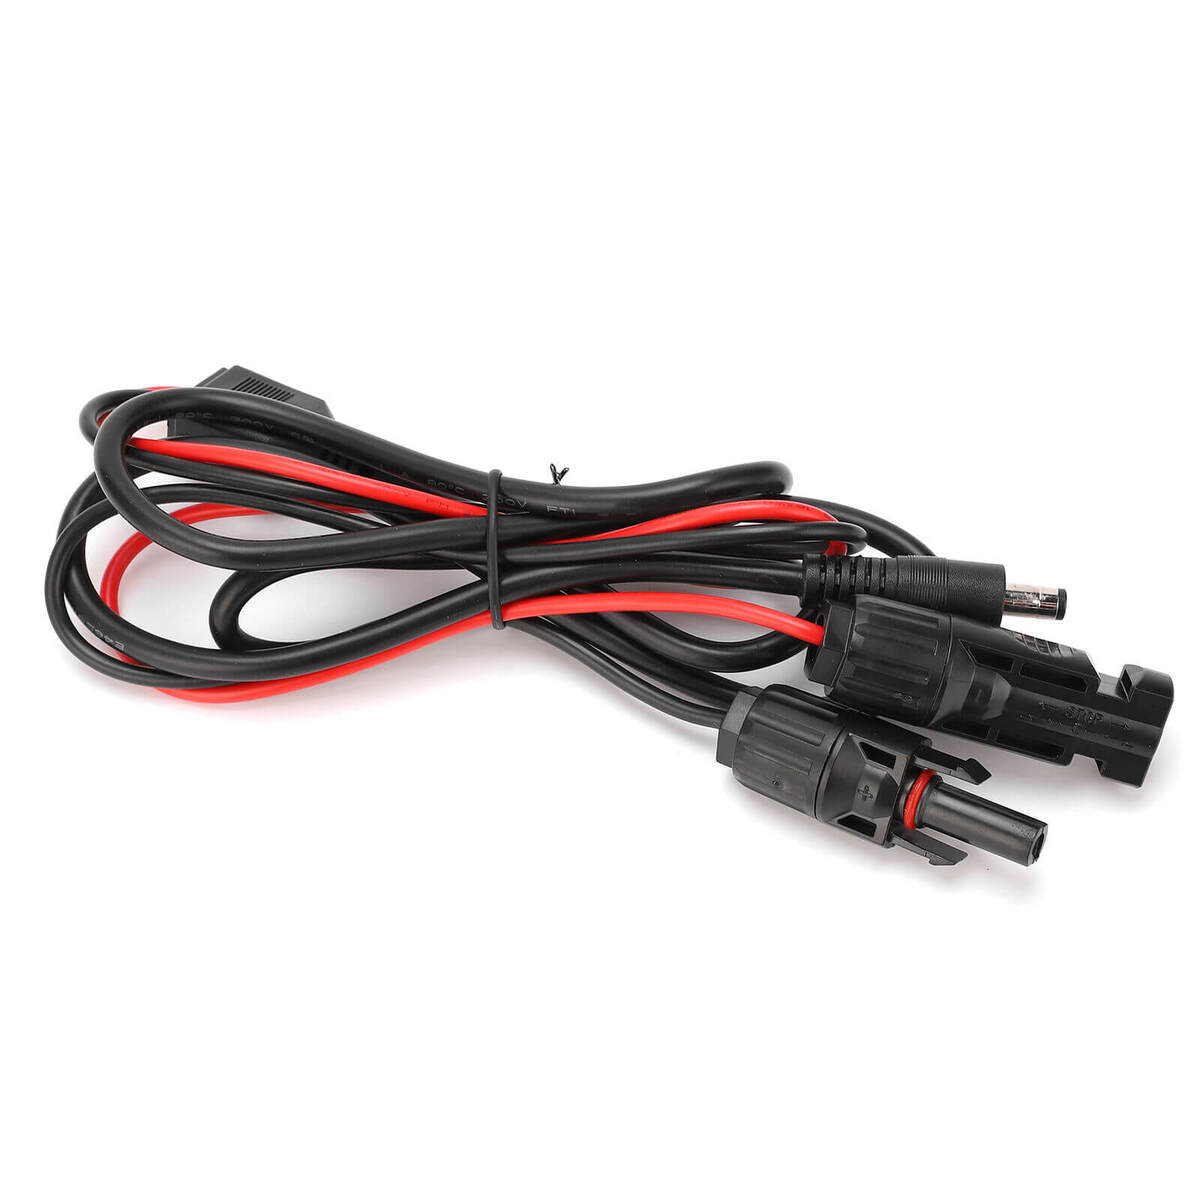 Adaptor Cable - MC4 to DC5521 (male)